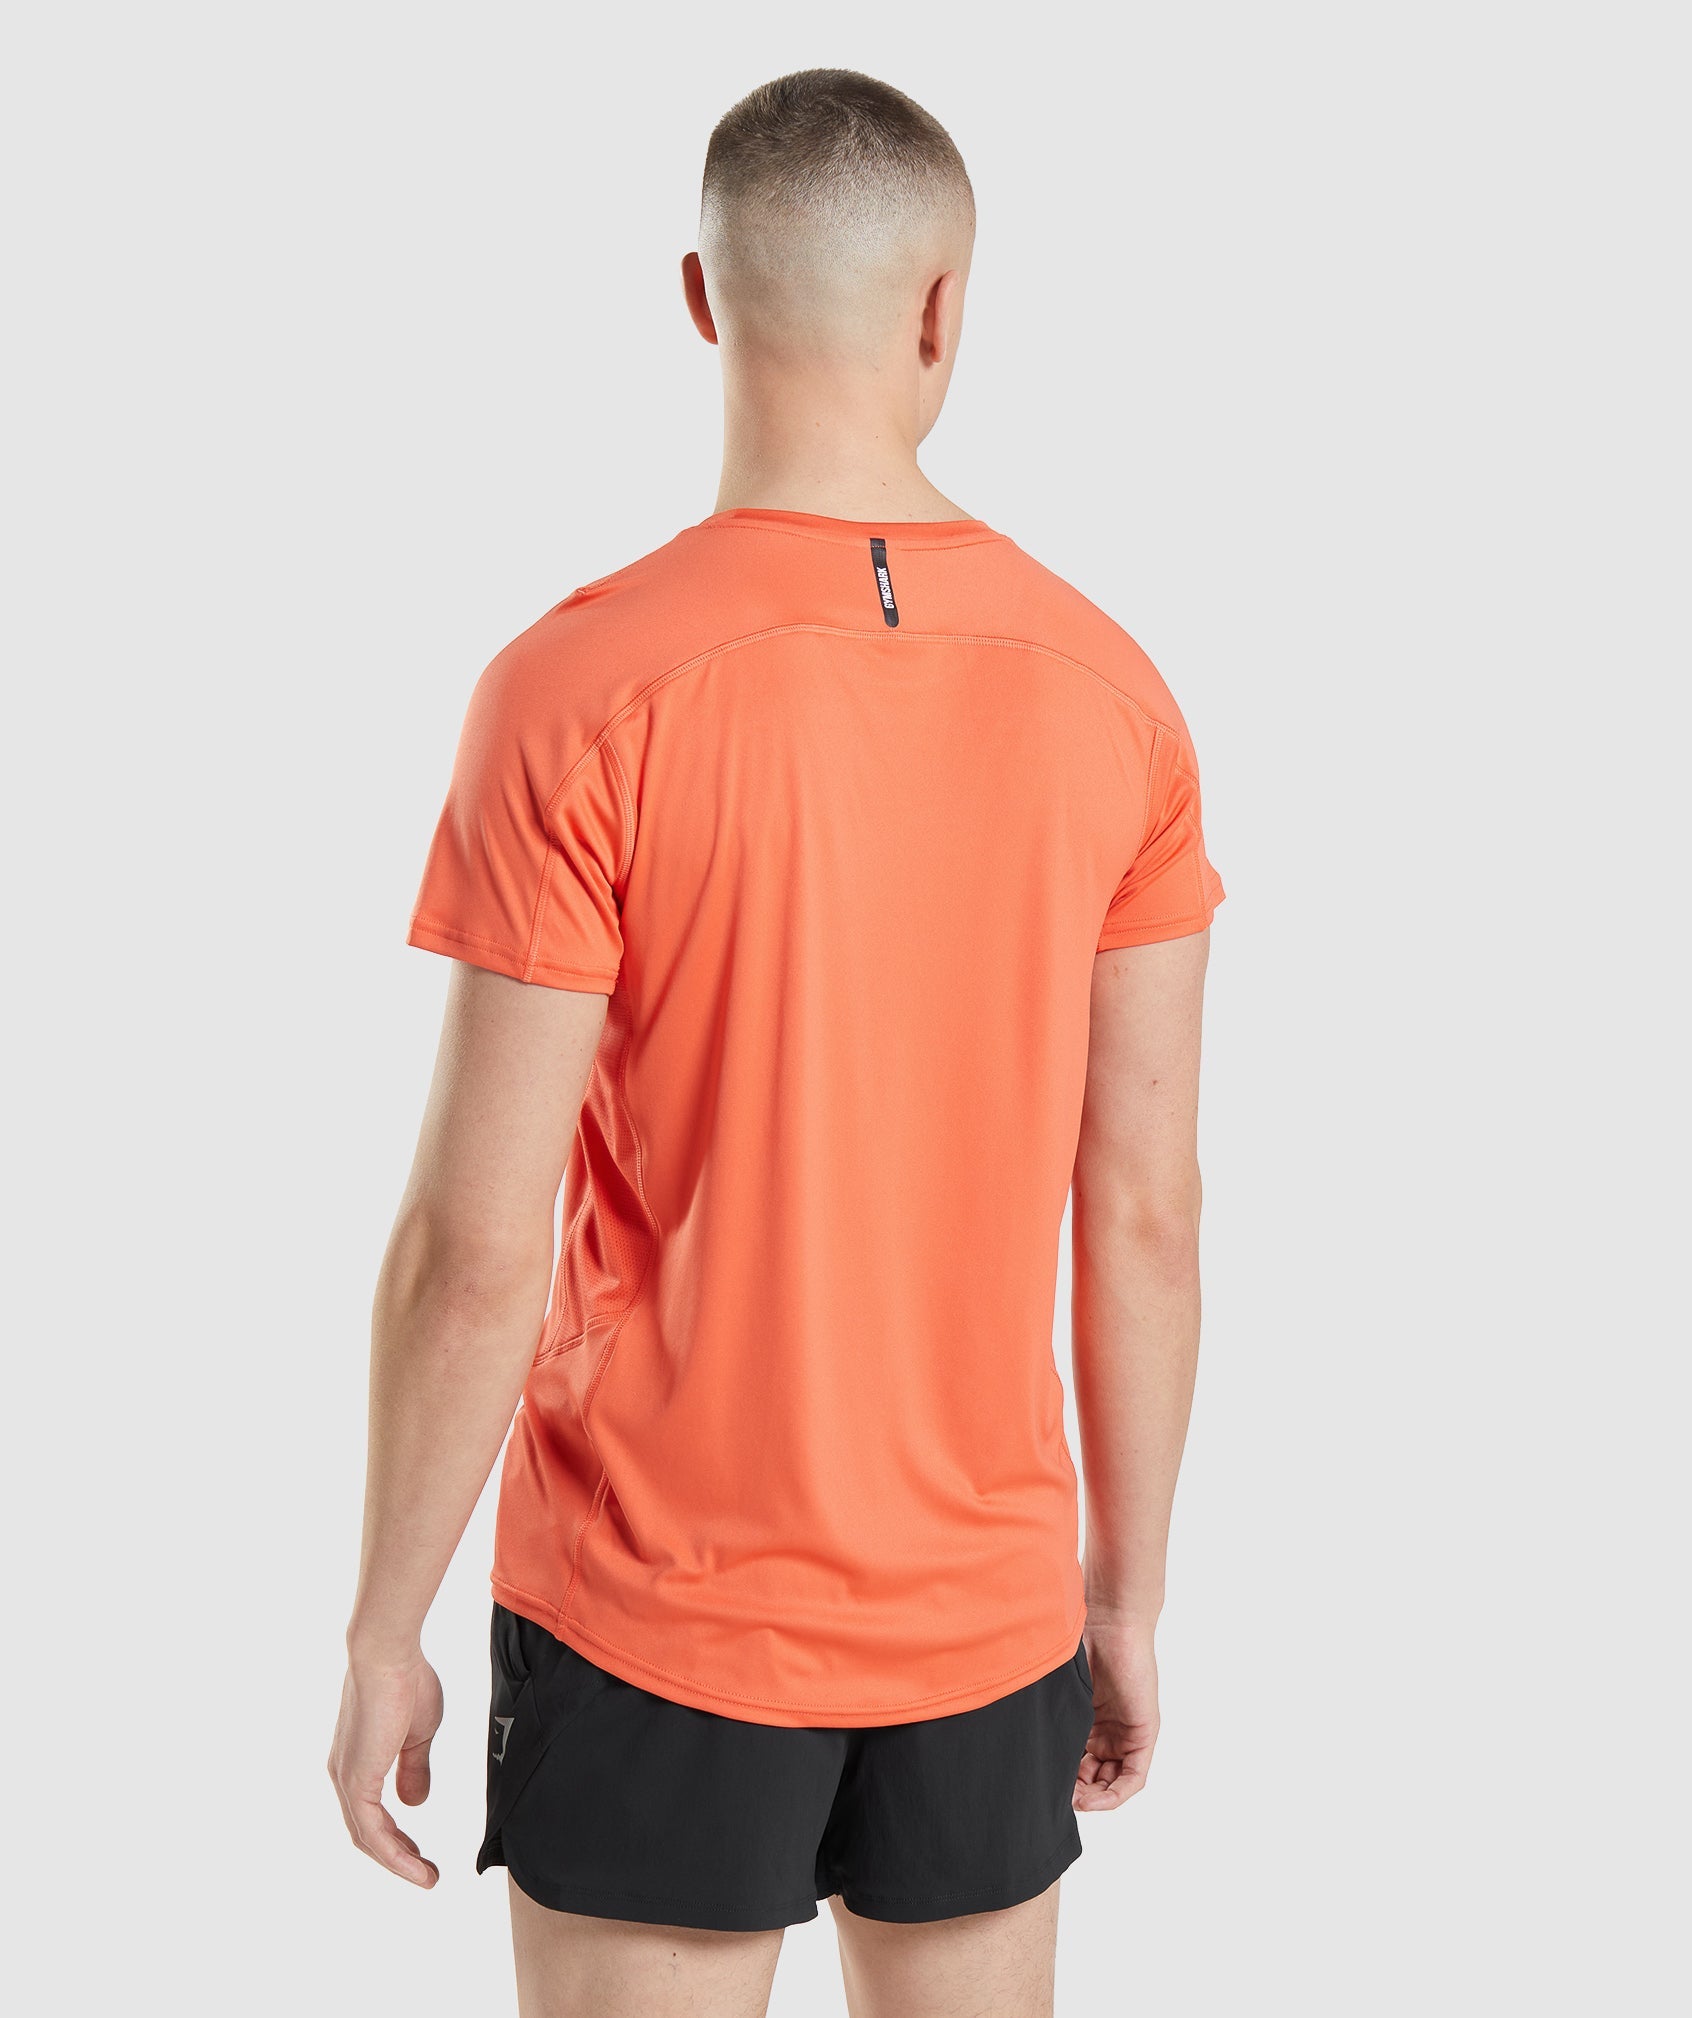 Men's Speed Collection, Running Clothes For Men